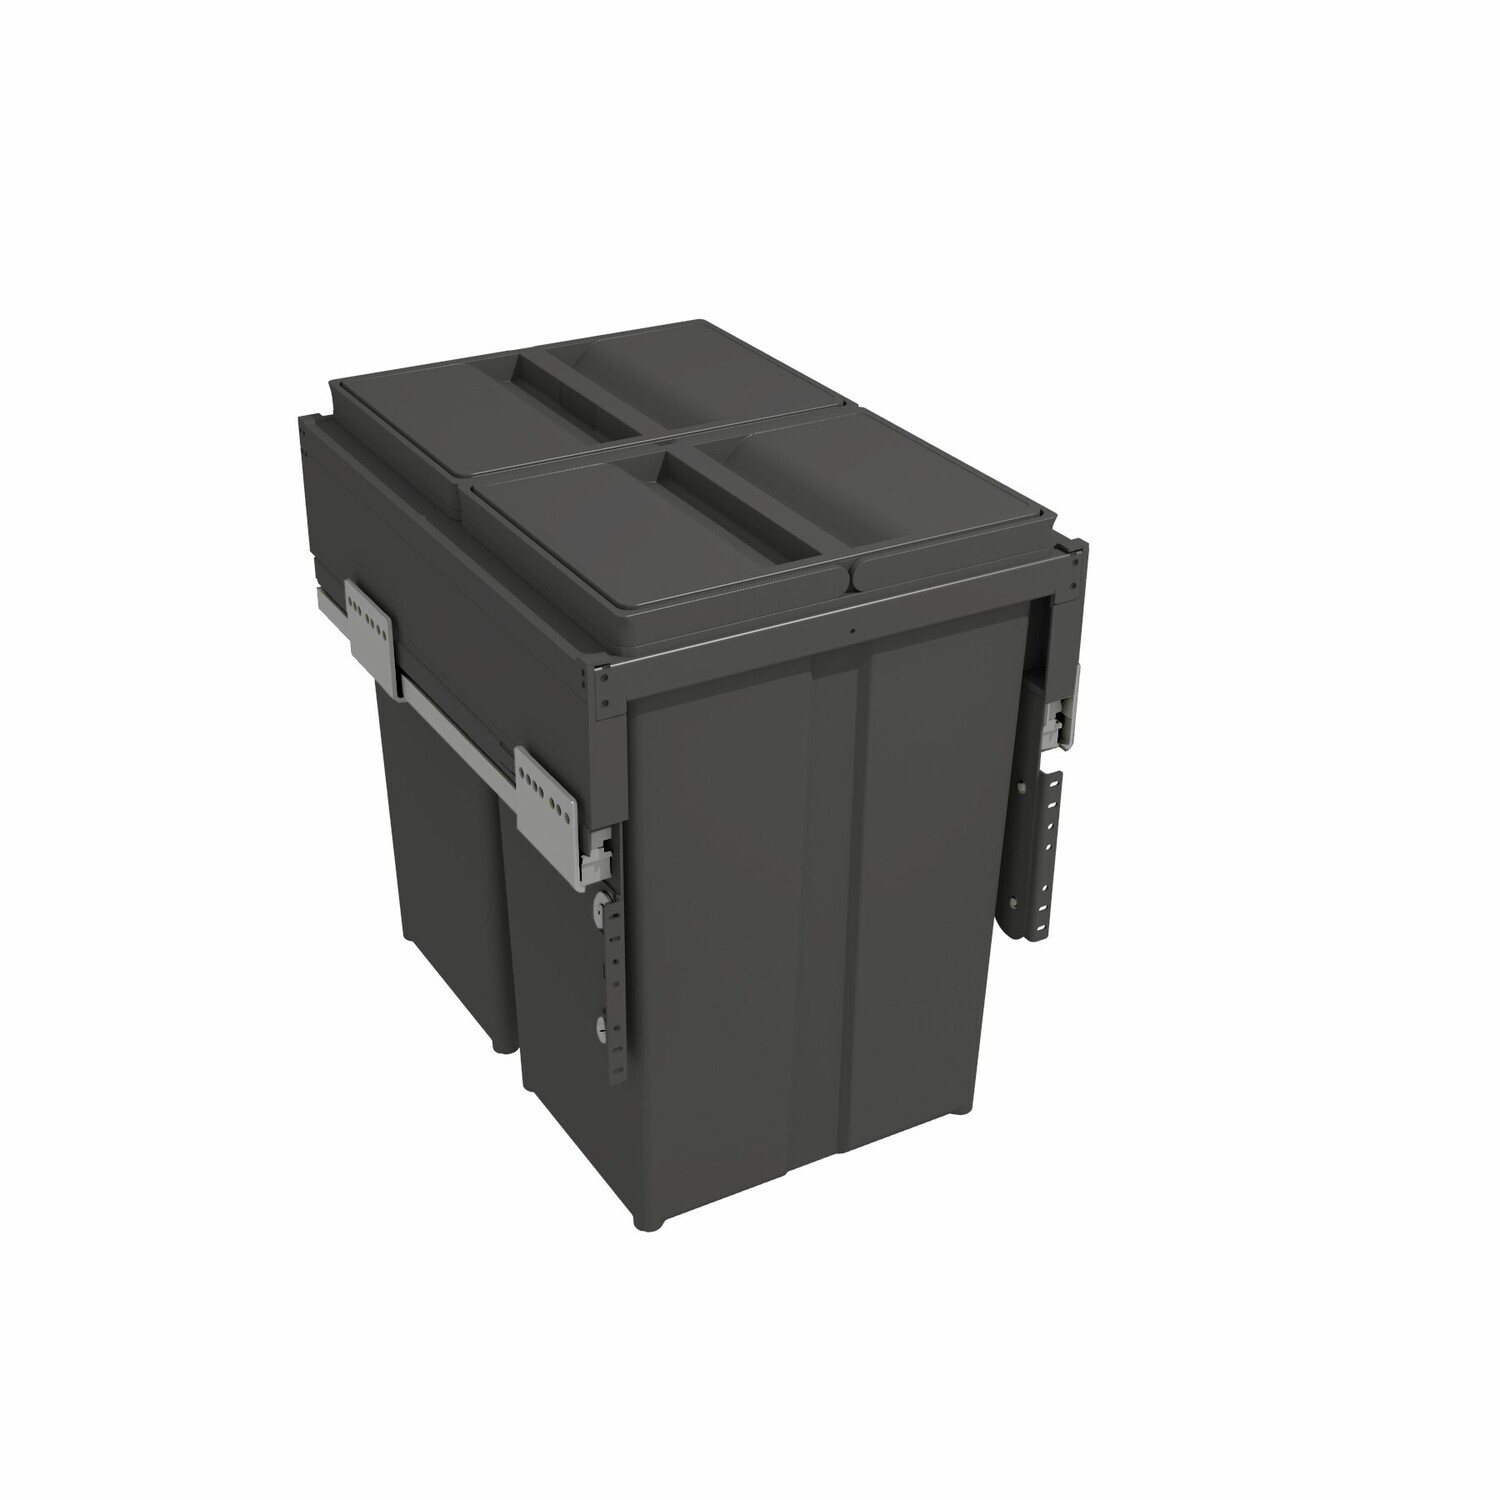 58 litre Anthracite Bin to Suit 400mm Cabinet.